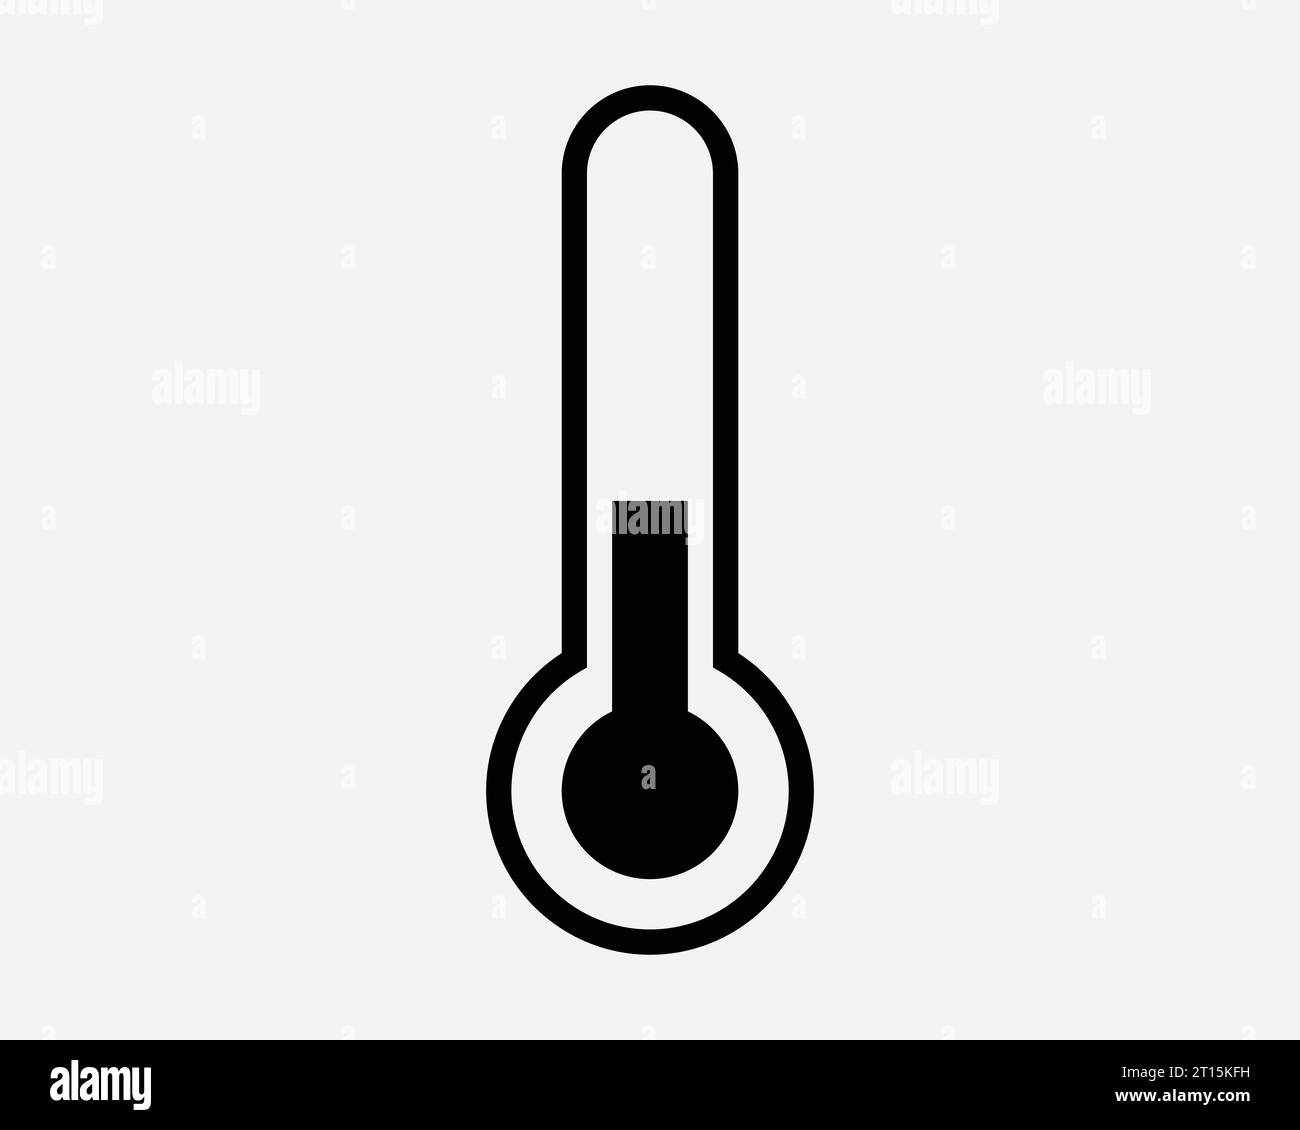 Thermometer Icon Temperature Measure Measurement Test Hot Cold Scale Measuring Tool Medical Black White Shape Line Outline Sign Symbol EPS Vector Stock Vector